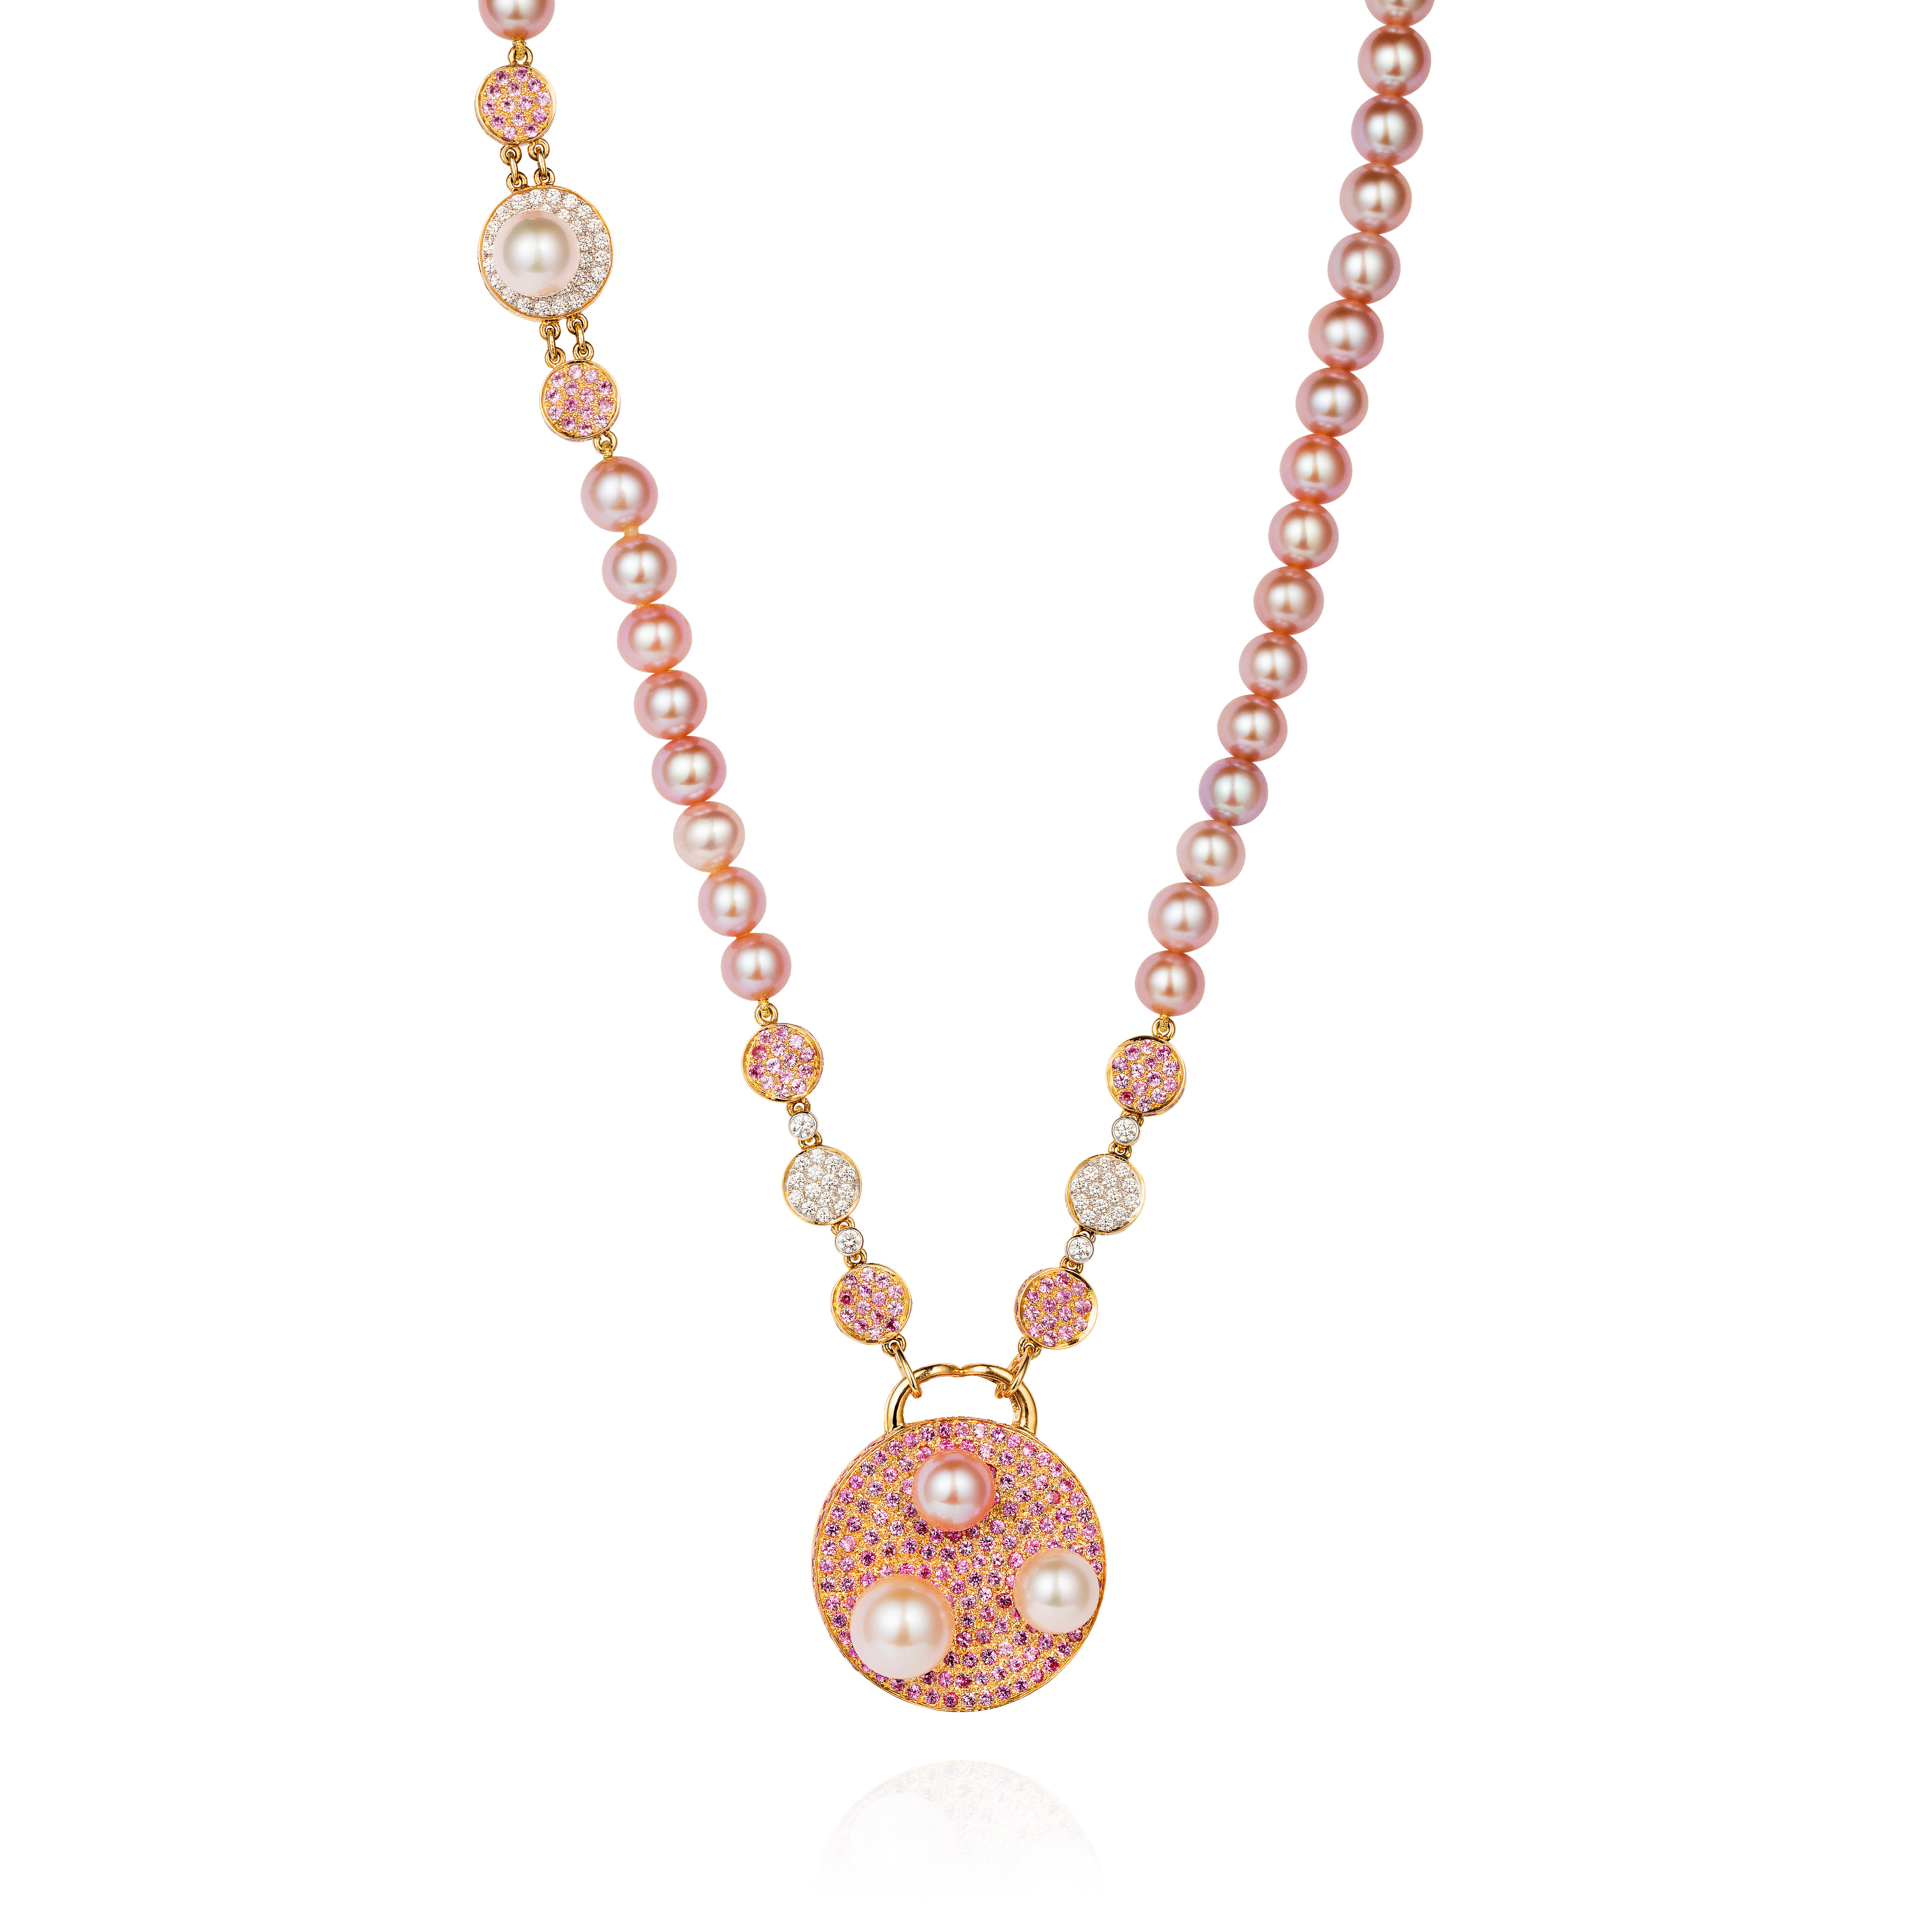 Saengduan Disc Necklace – Pink Sapphires, Fancy Pearls And Diamonds 18k Gold